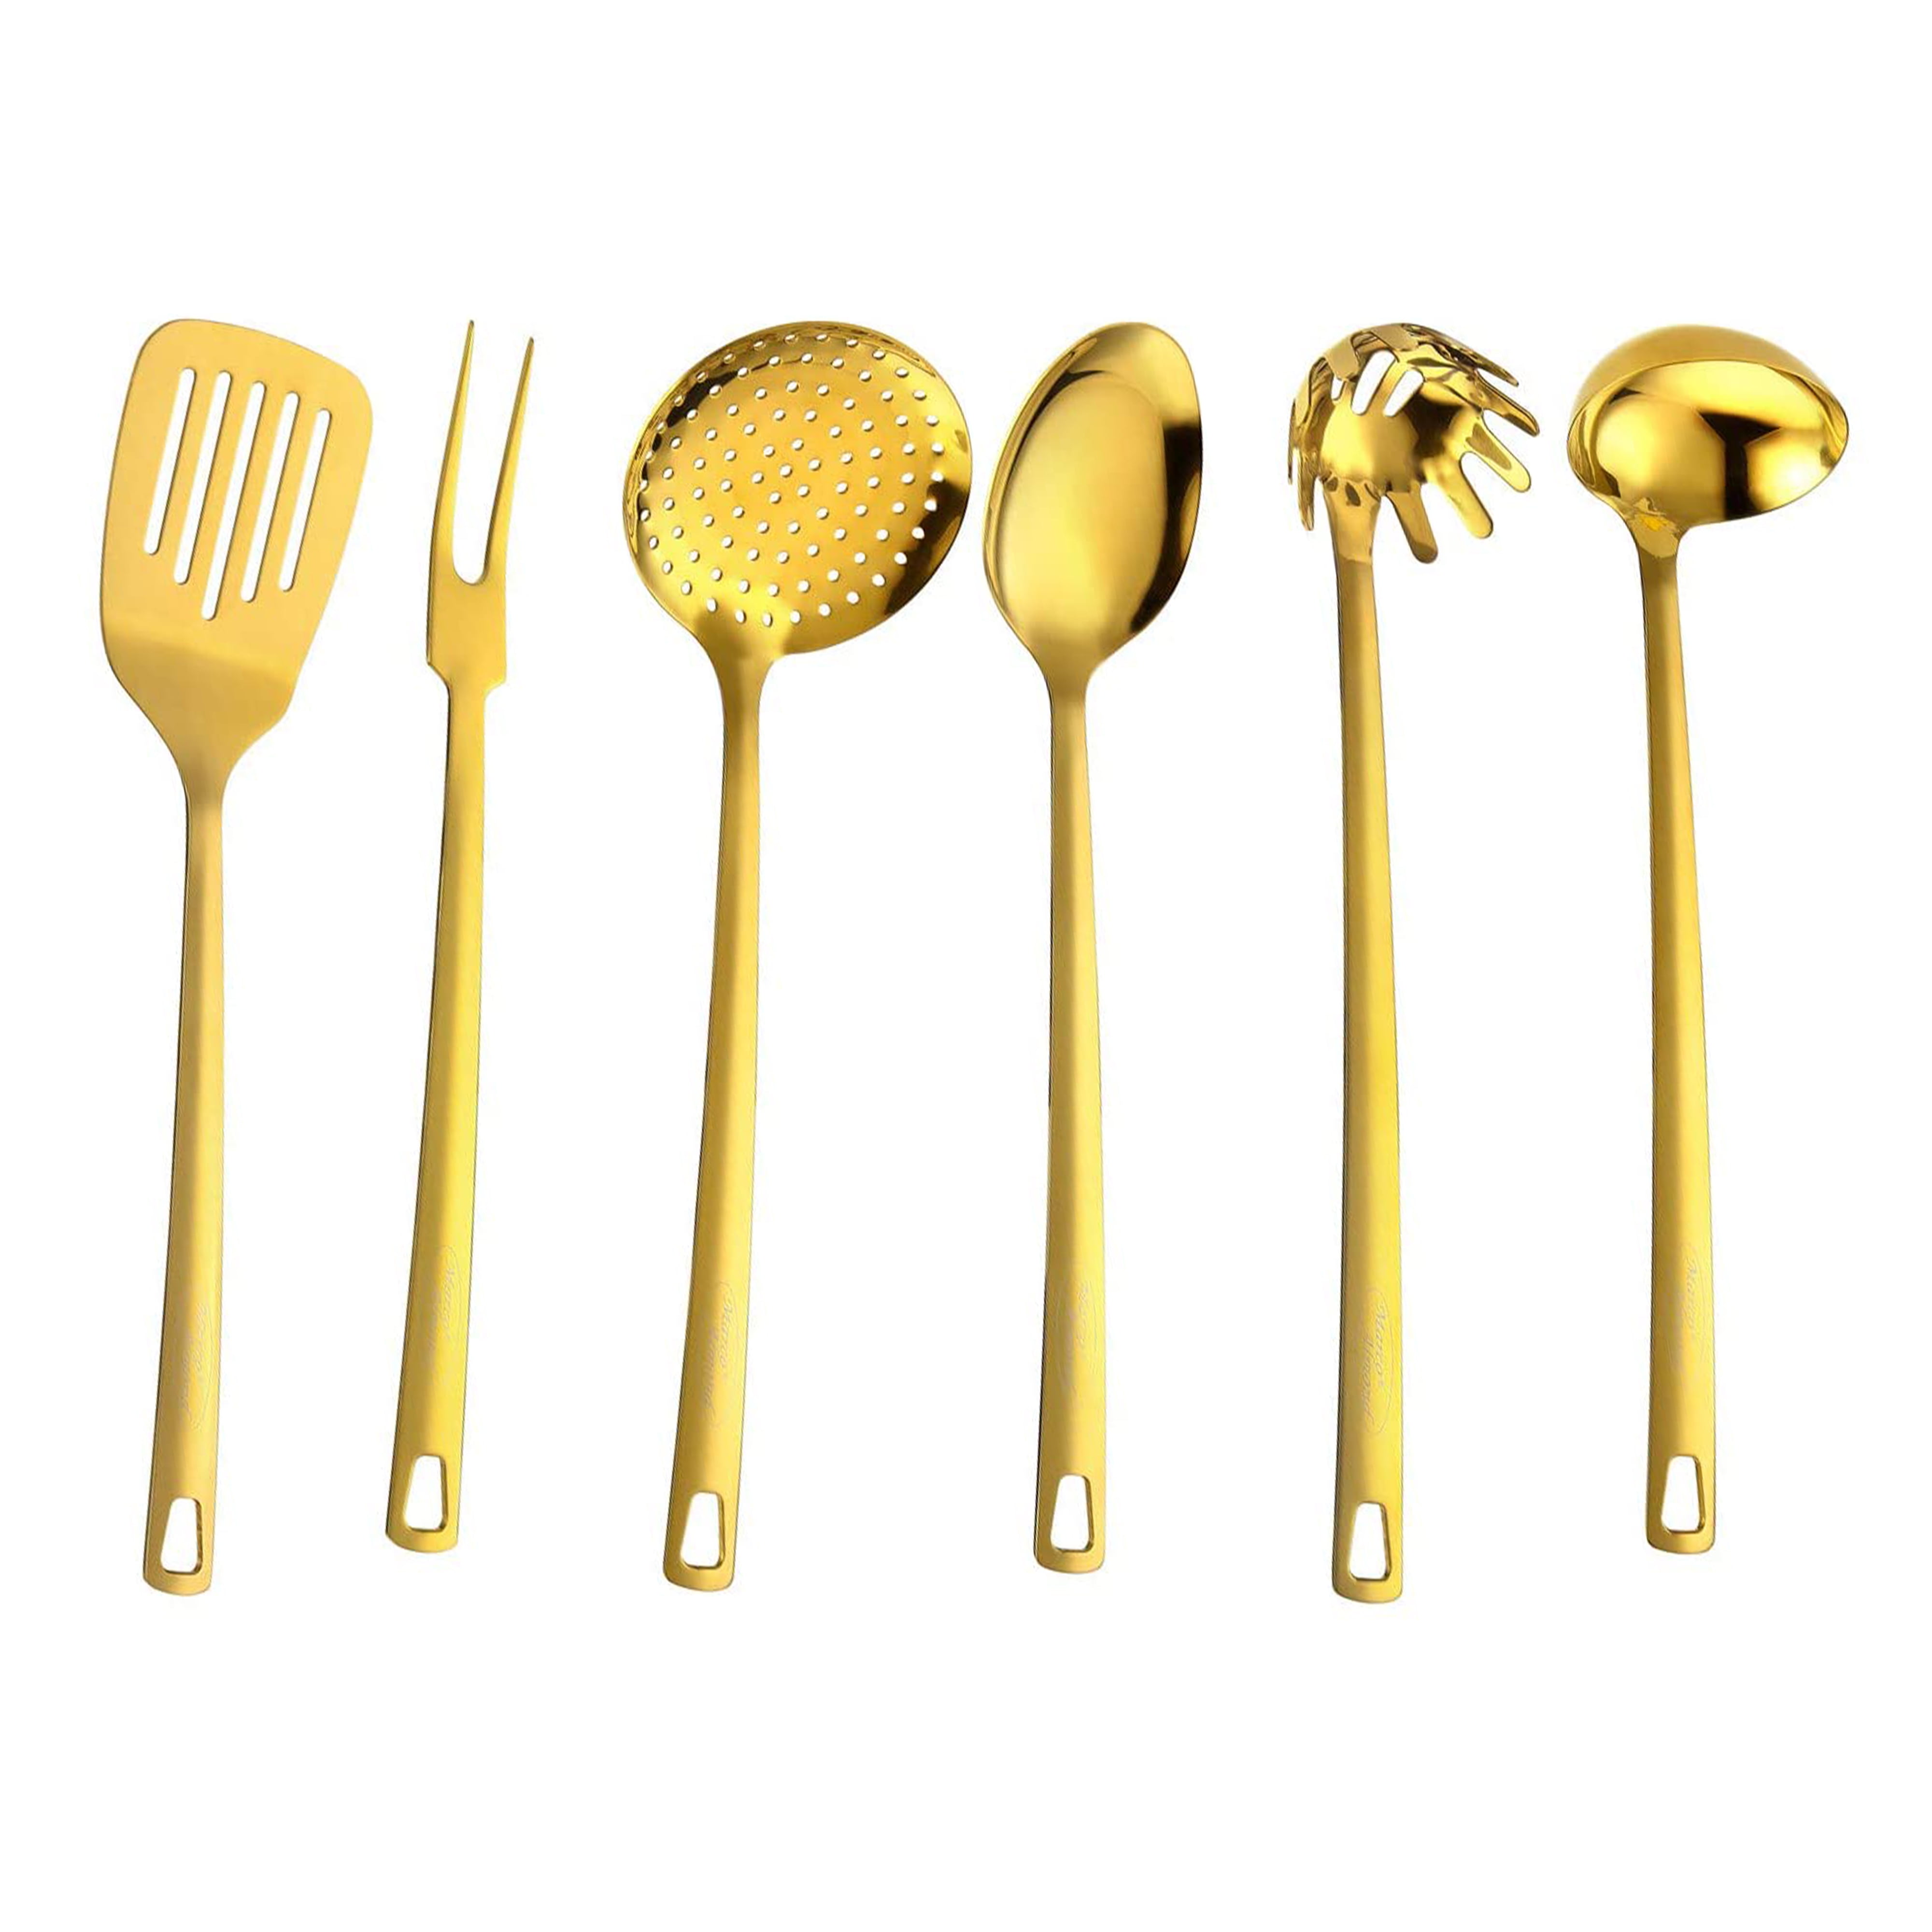 6pc Stainless Steel Cooking Utensils Set Gold Soup Ladle Spatula